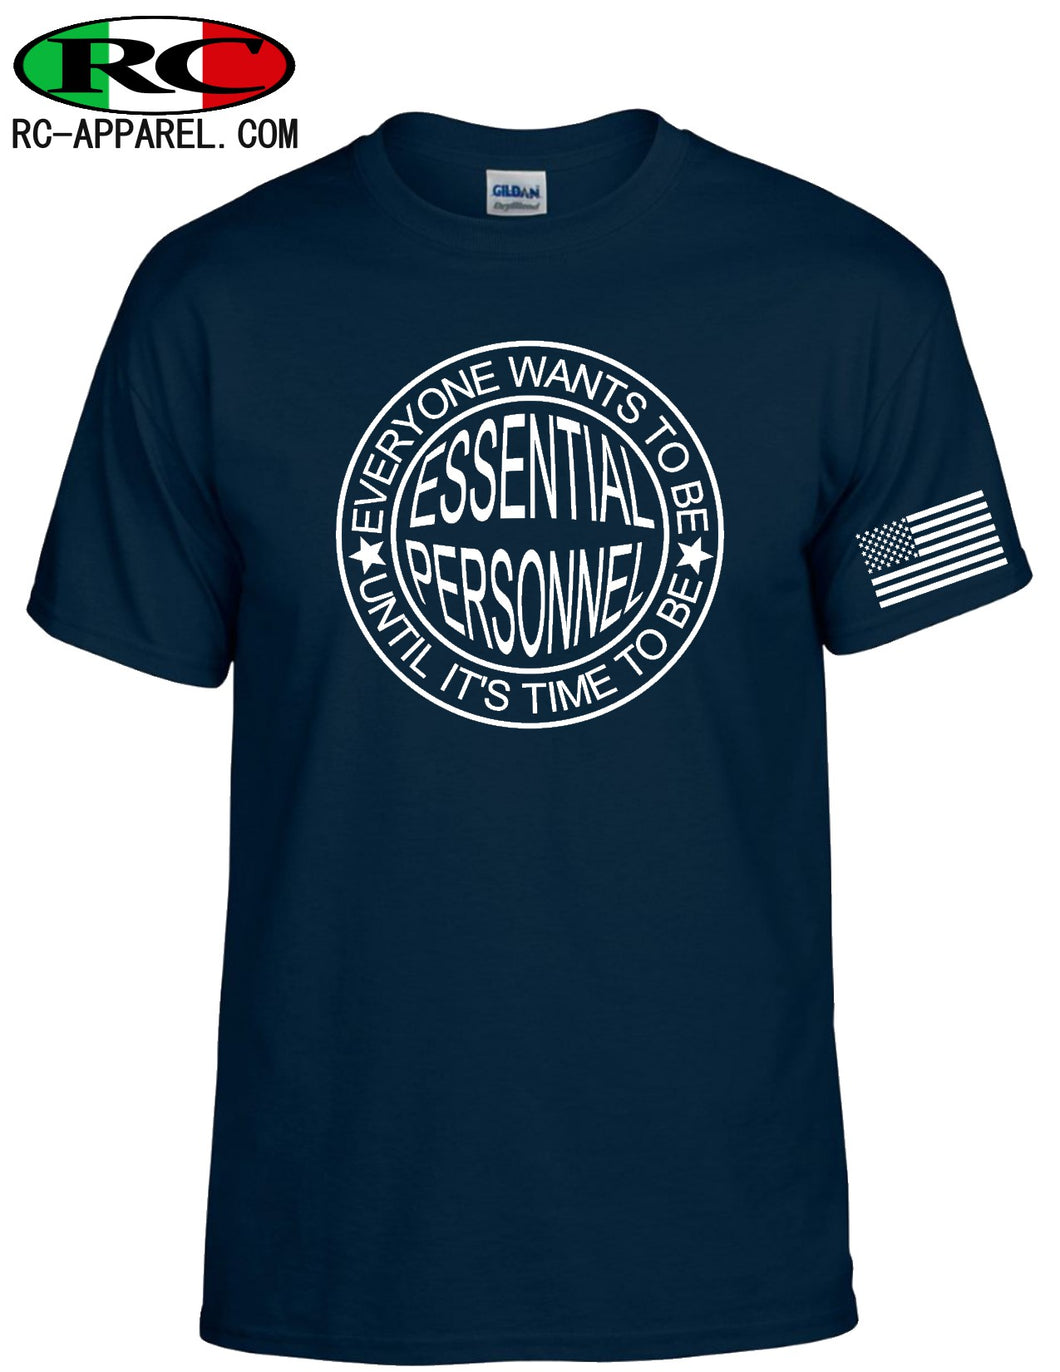 ESSENTIAL PERSONNEL T-Shirt